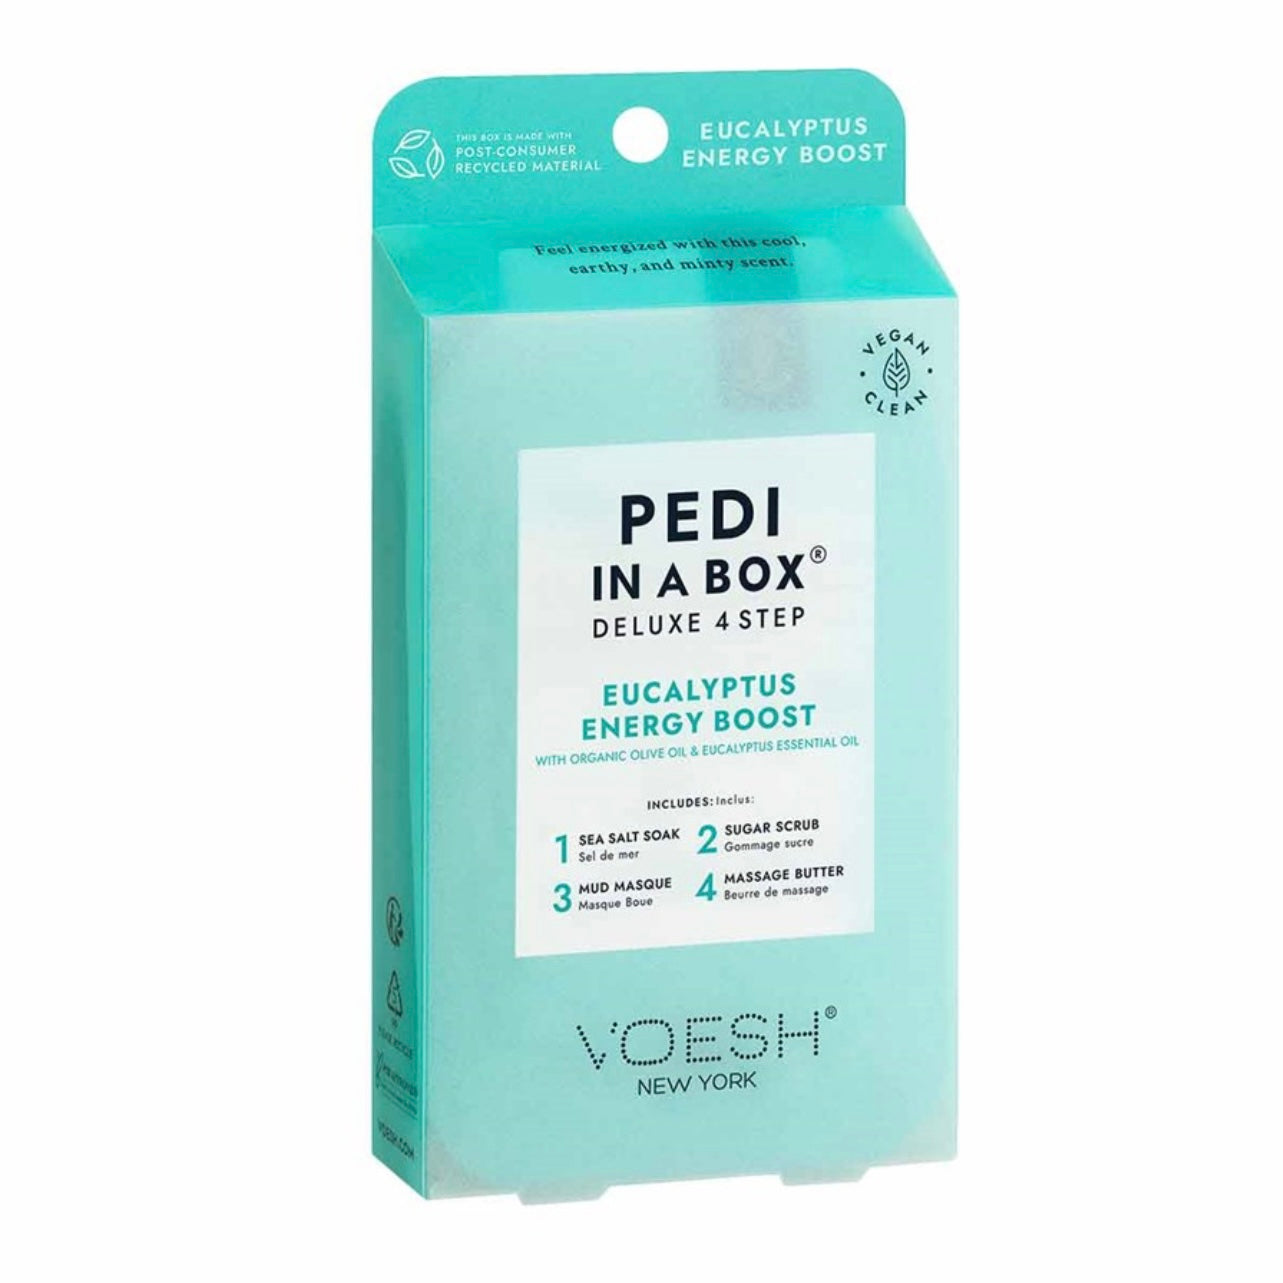 VOESH Pedi In A Box: Deluxe 4 Step - Eucalyptus Energy Boost